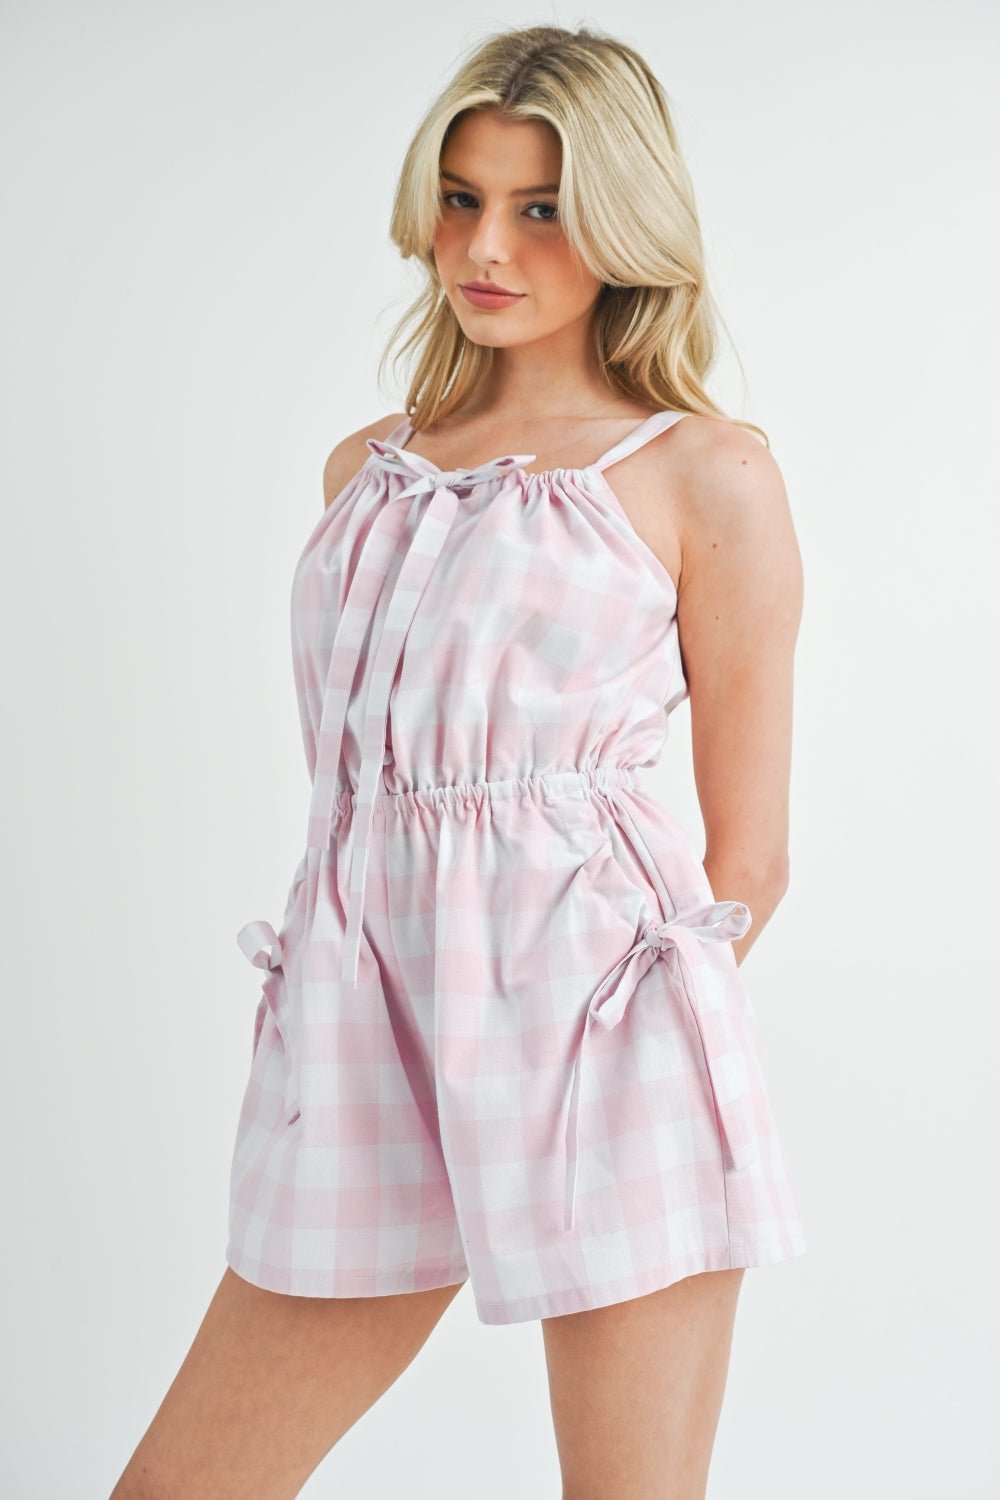 Sleeveless Plaid Button Down Romper in PinkRomperMable